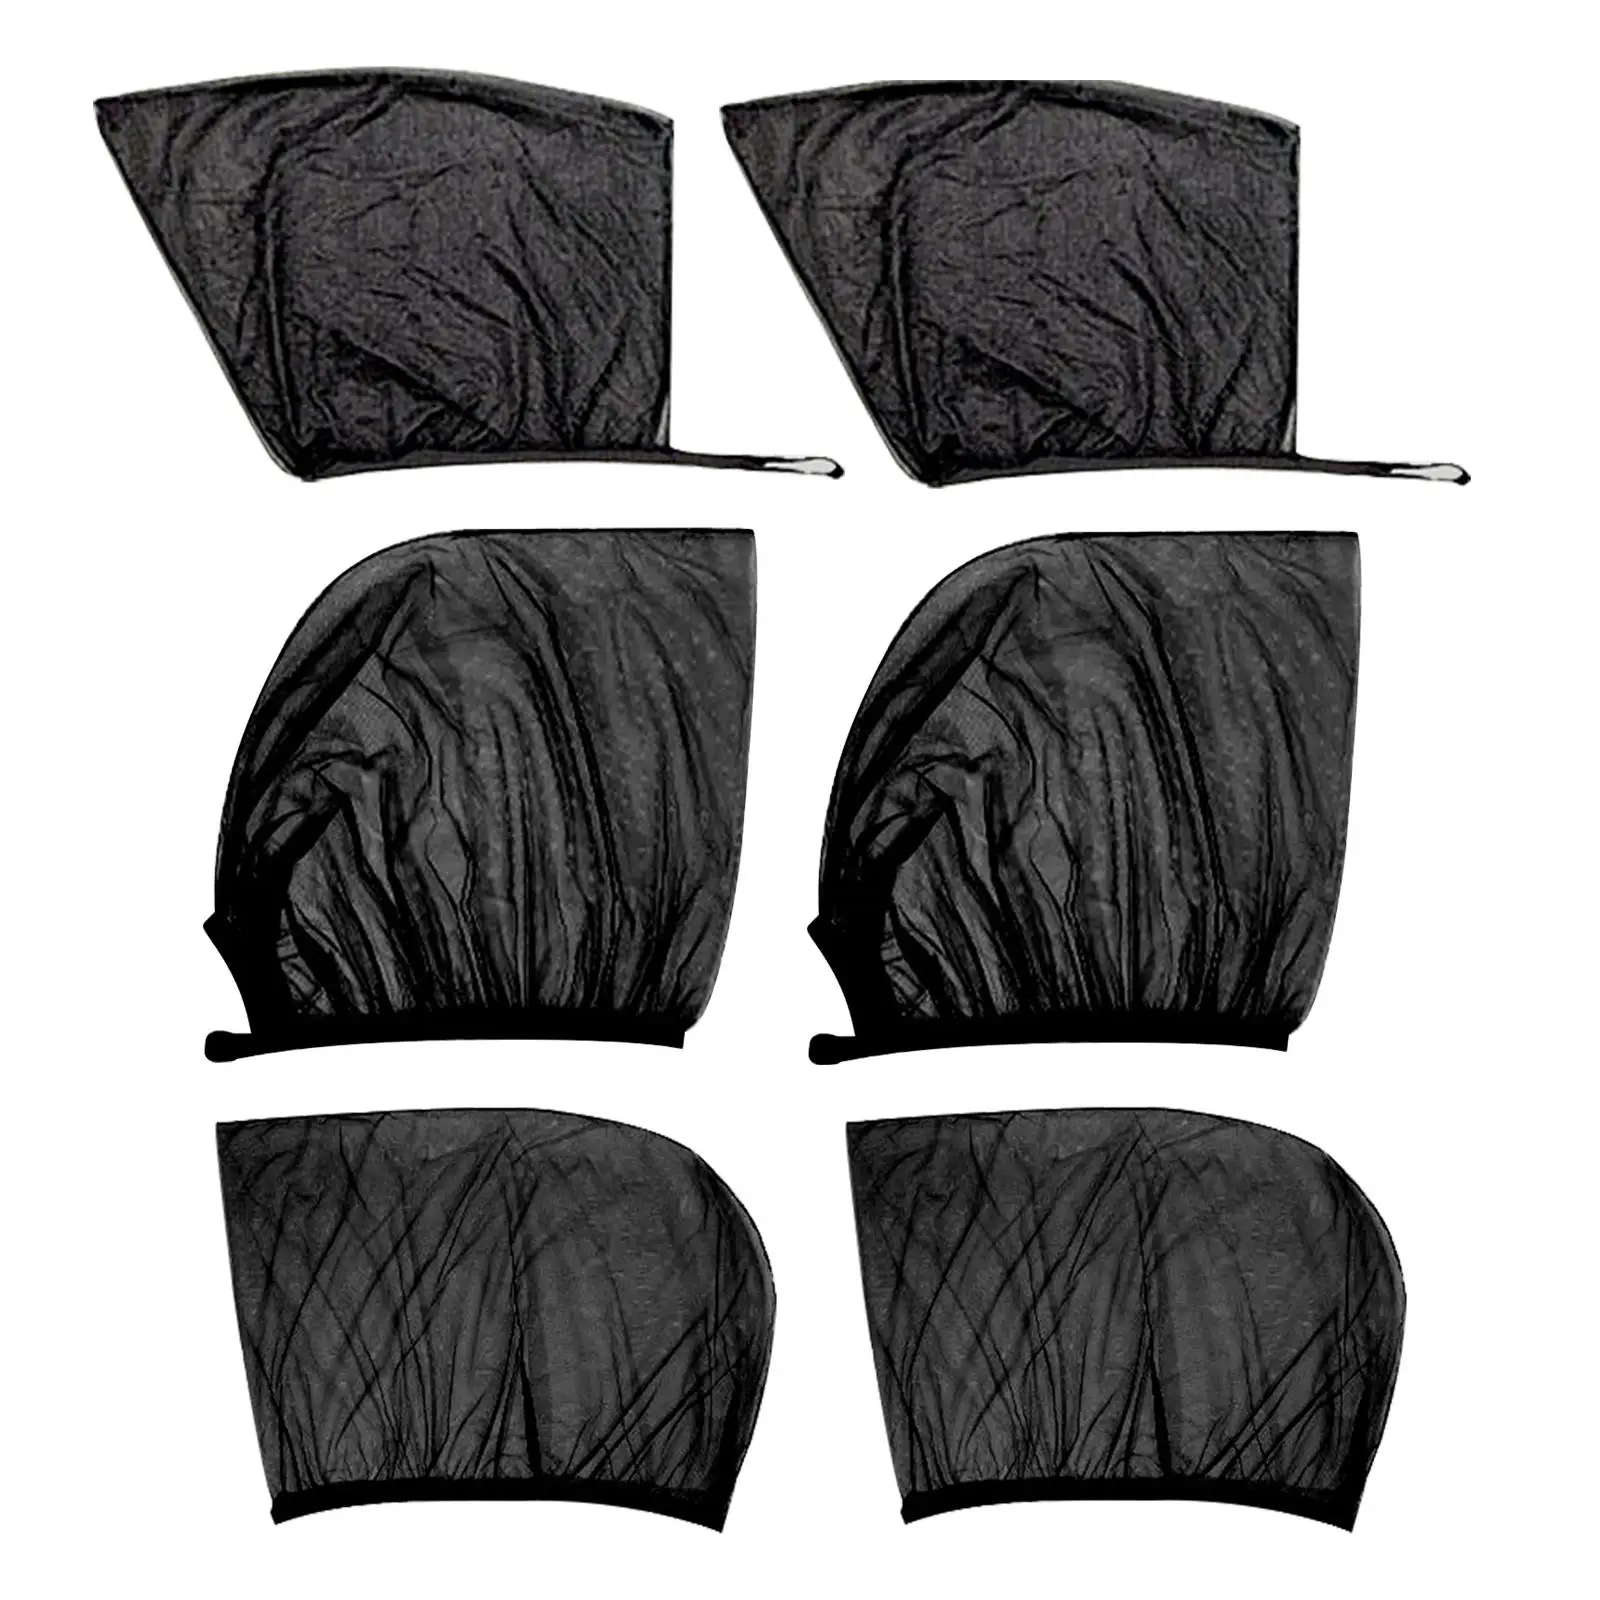 Car Window Shades Breathable Stretchy Mesh Sun Blocking Blackout Covers for Camping